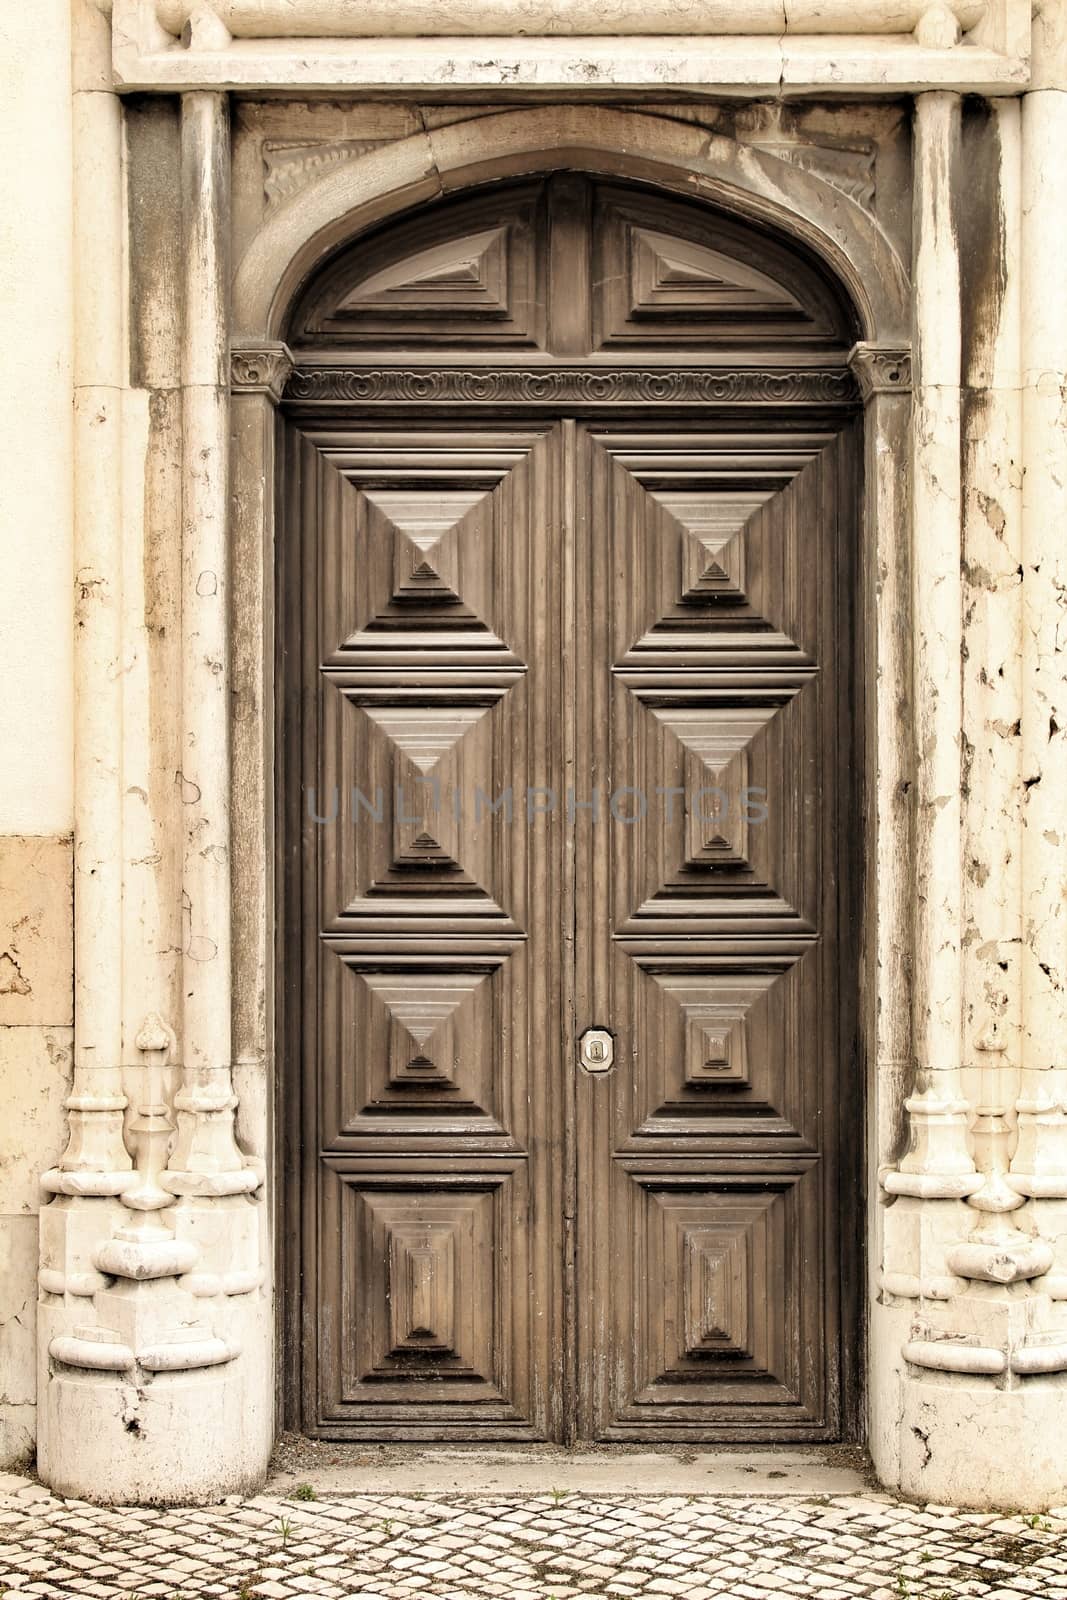 Old wooden door with wrought iron details in Lisbon